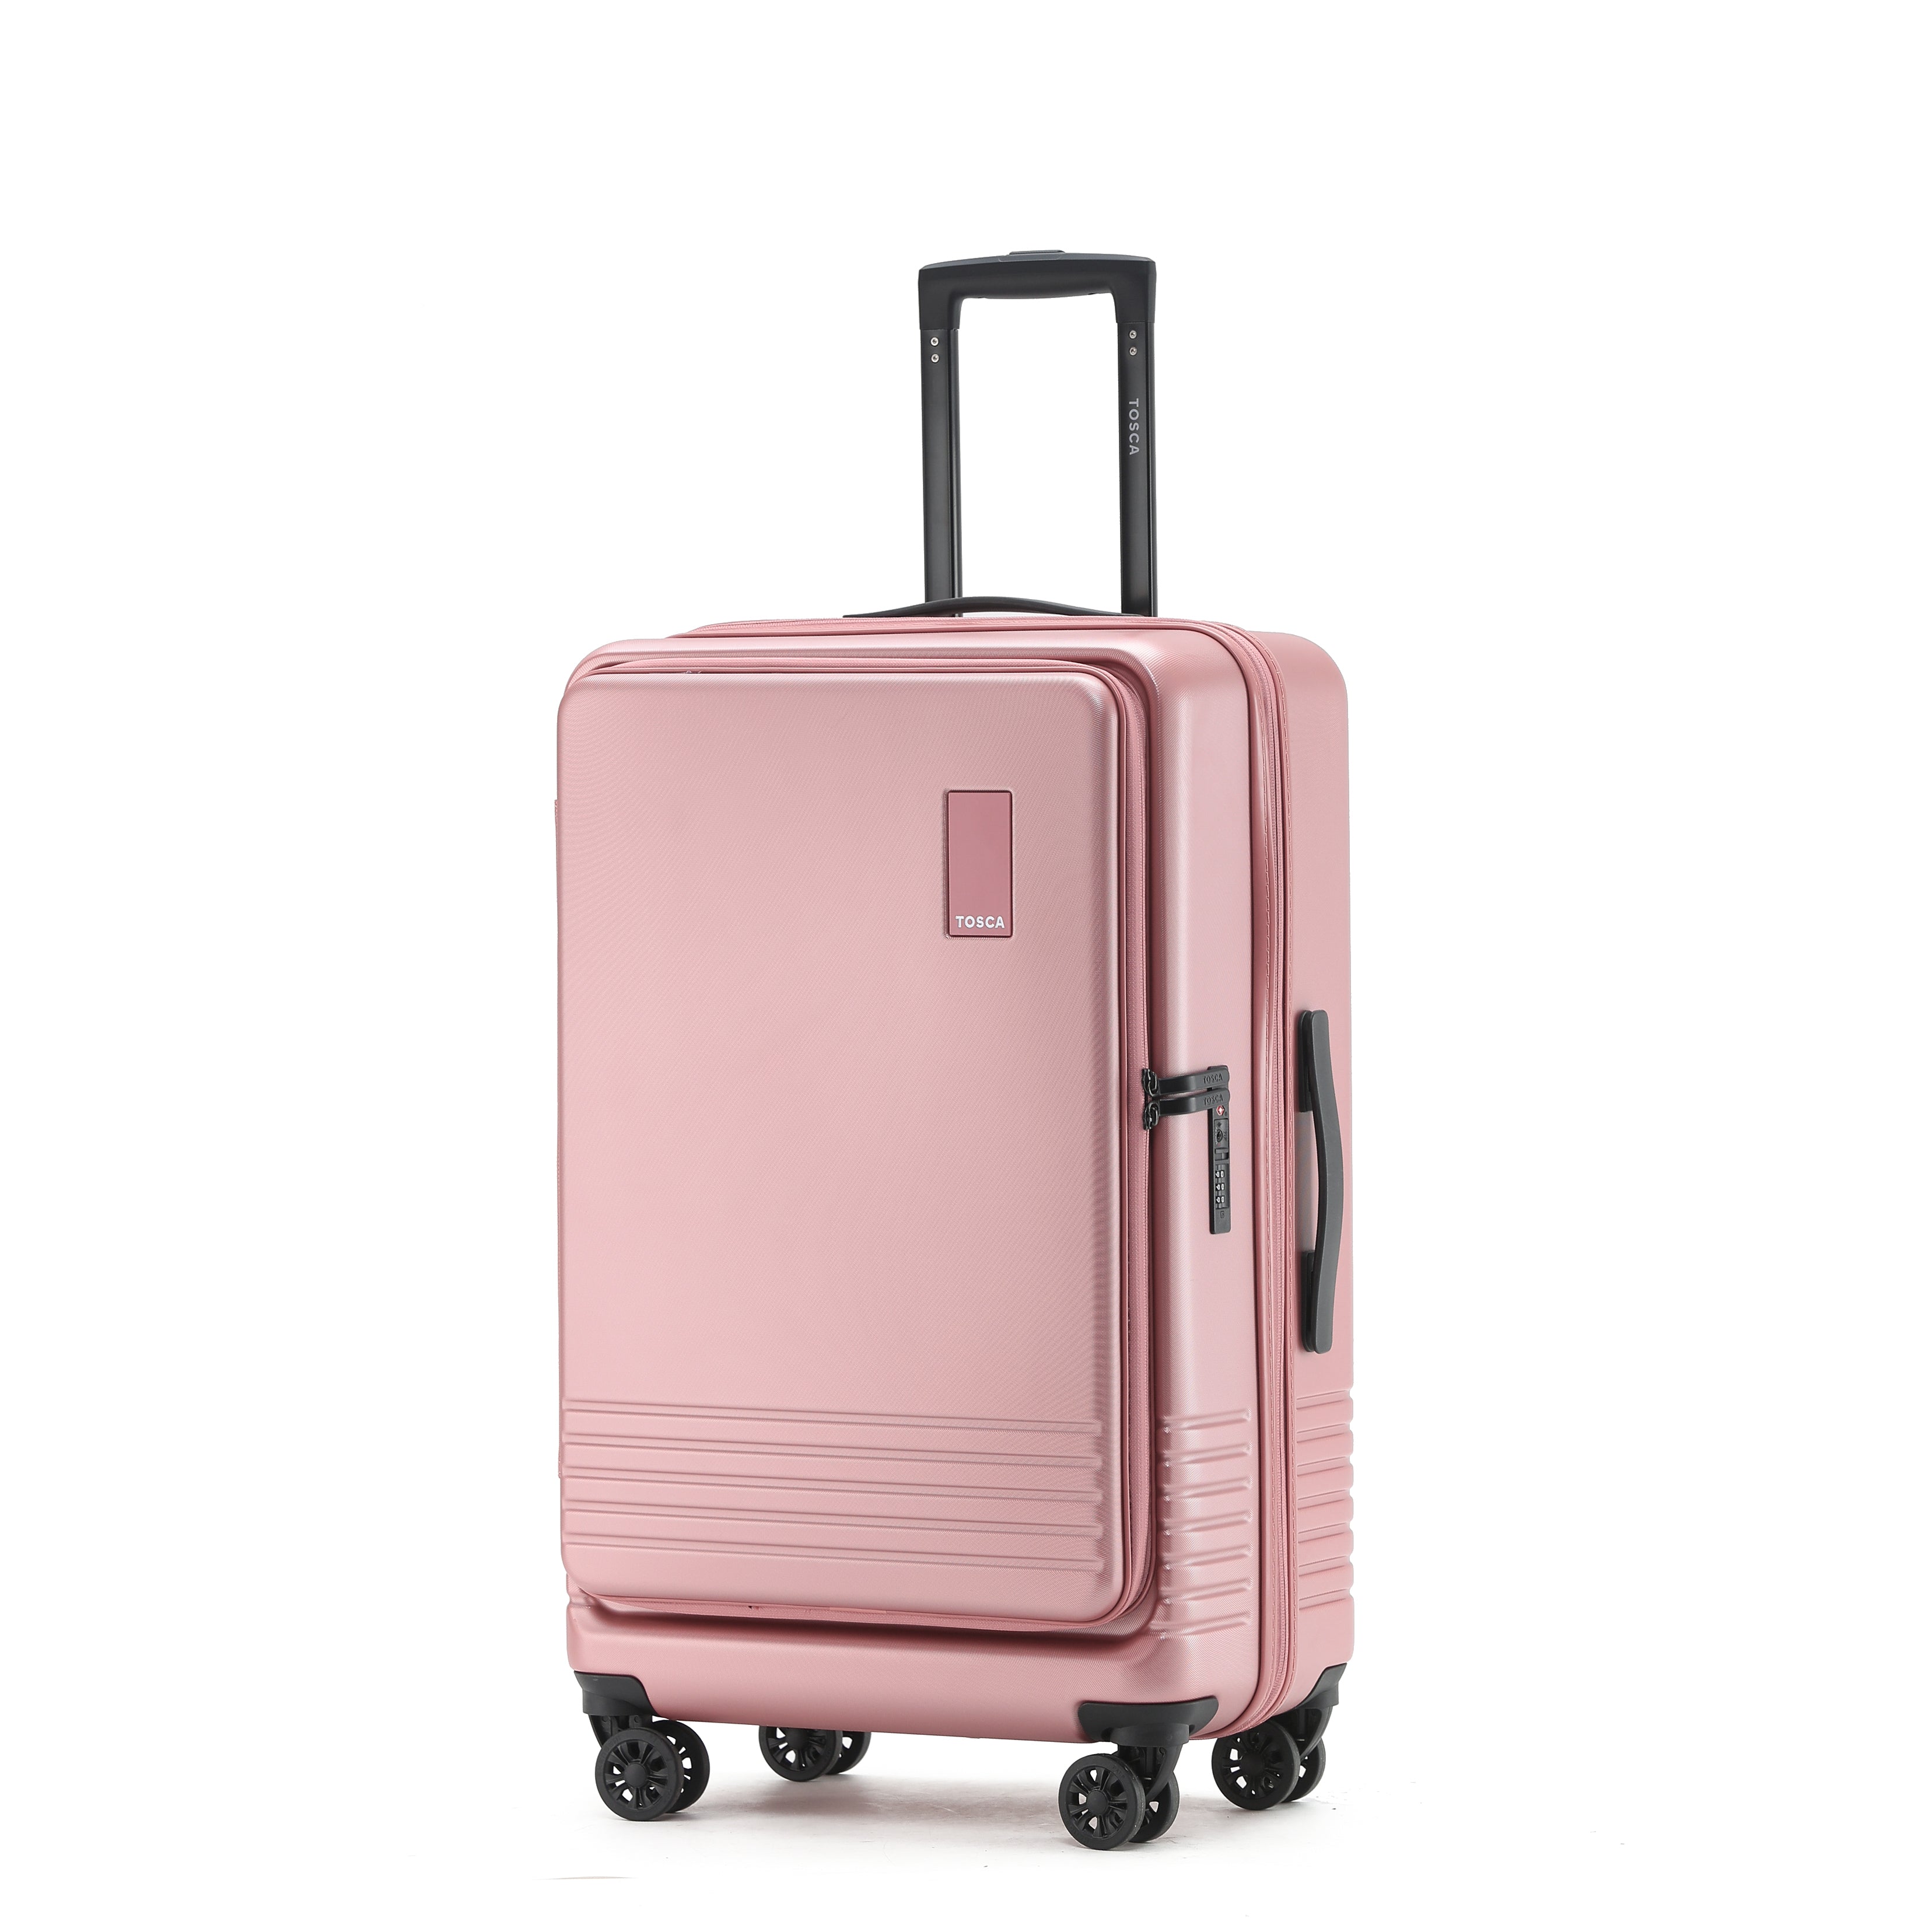 Tosca - TCA644 Horizon Front lid opening Set of 3 suitcases - Dusty Rose-8